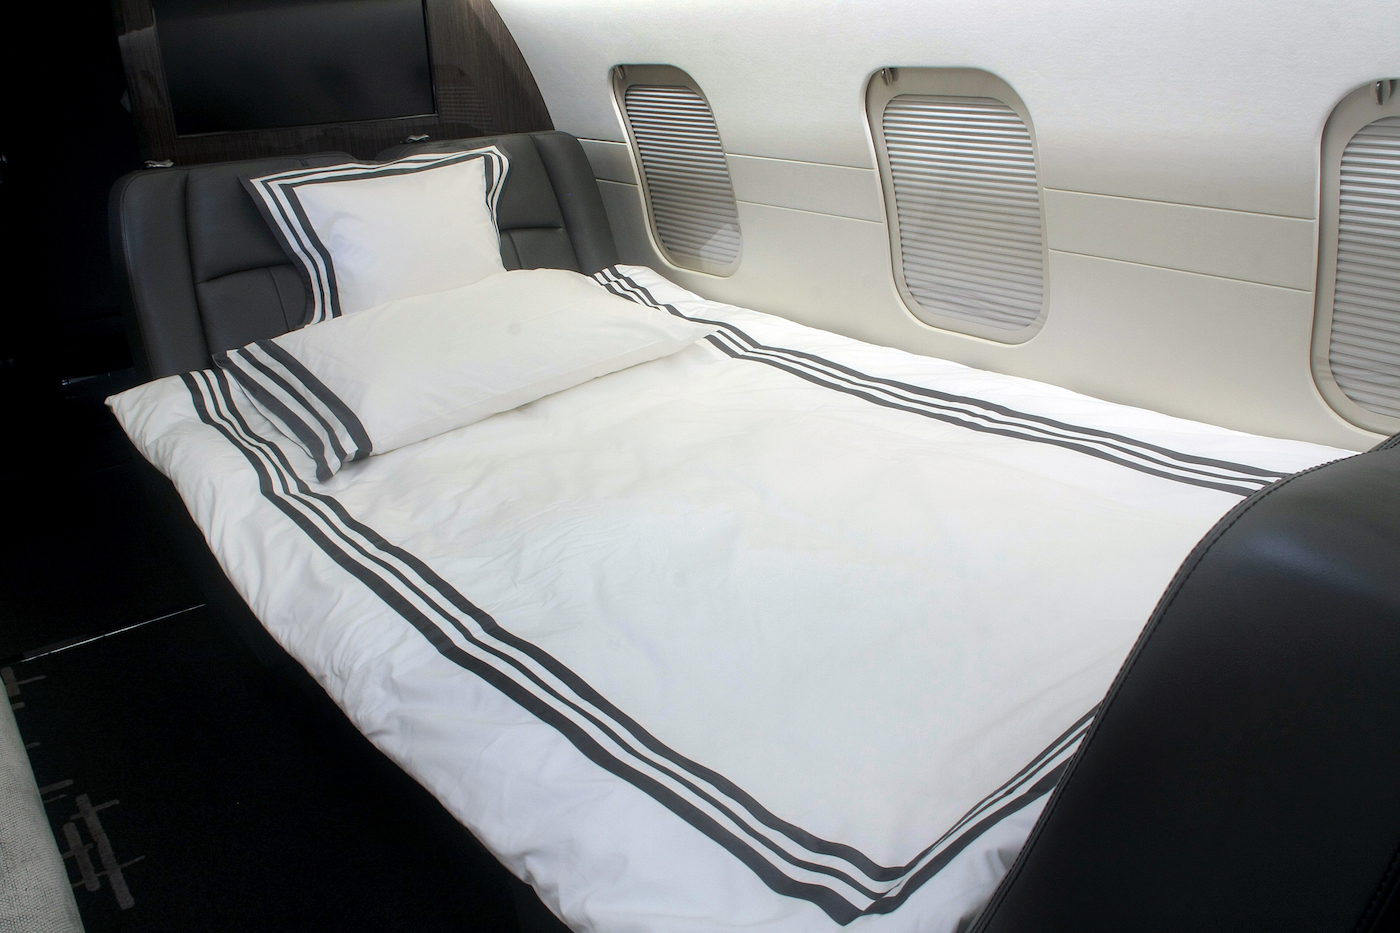 corporate-jet-bed